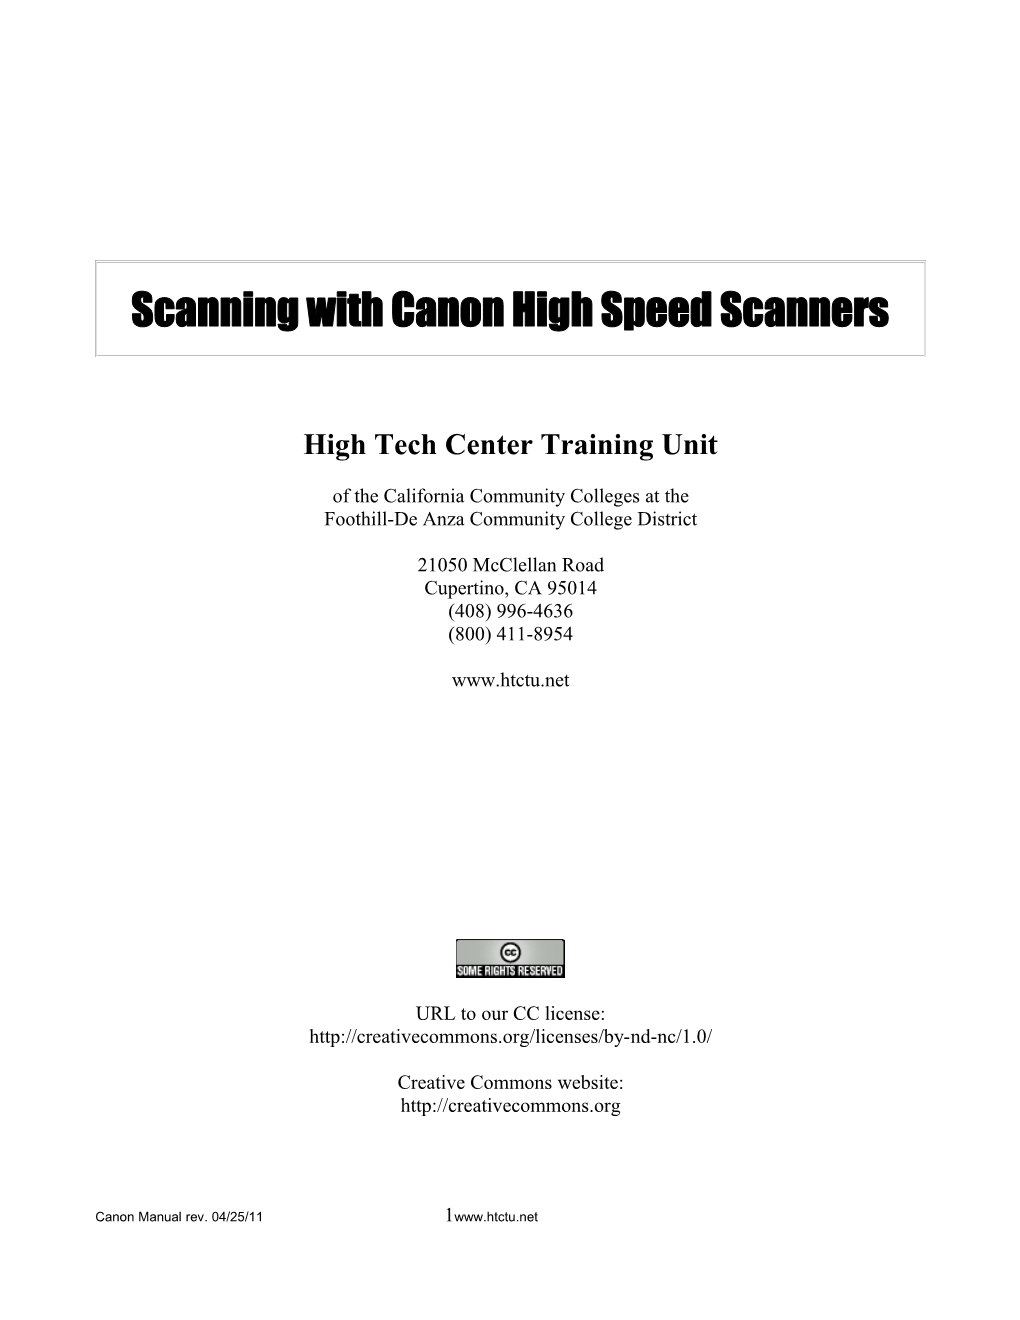 Scanning with Canon High Speed Scanners